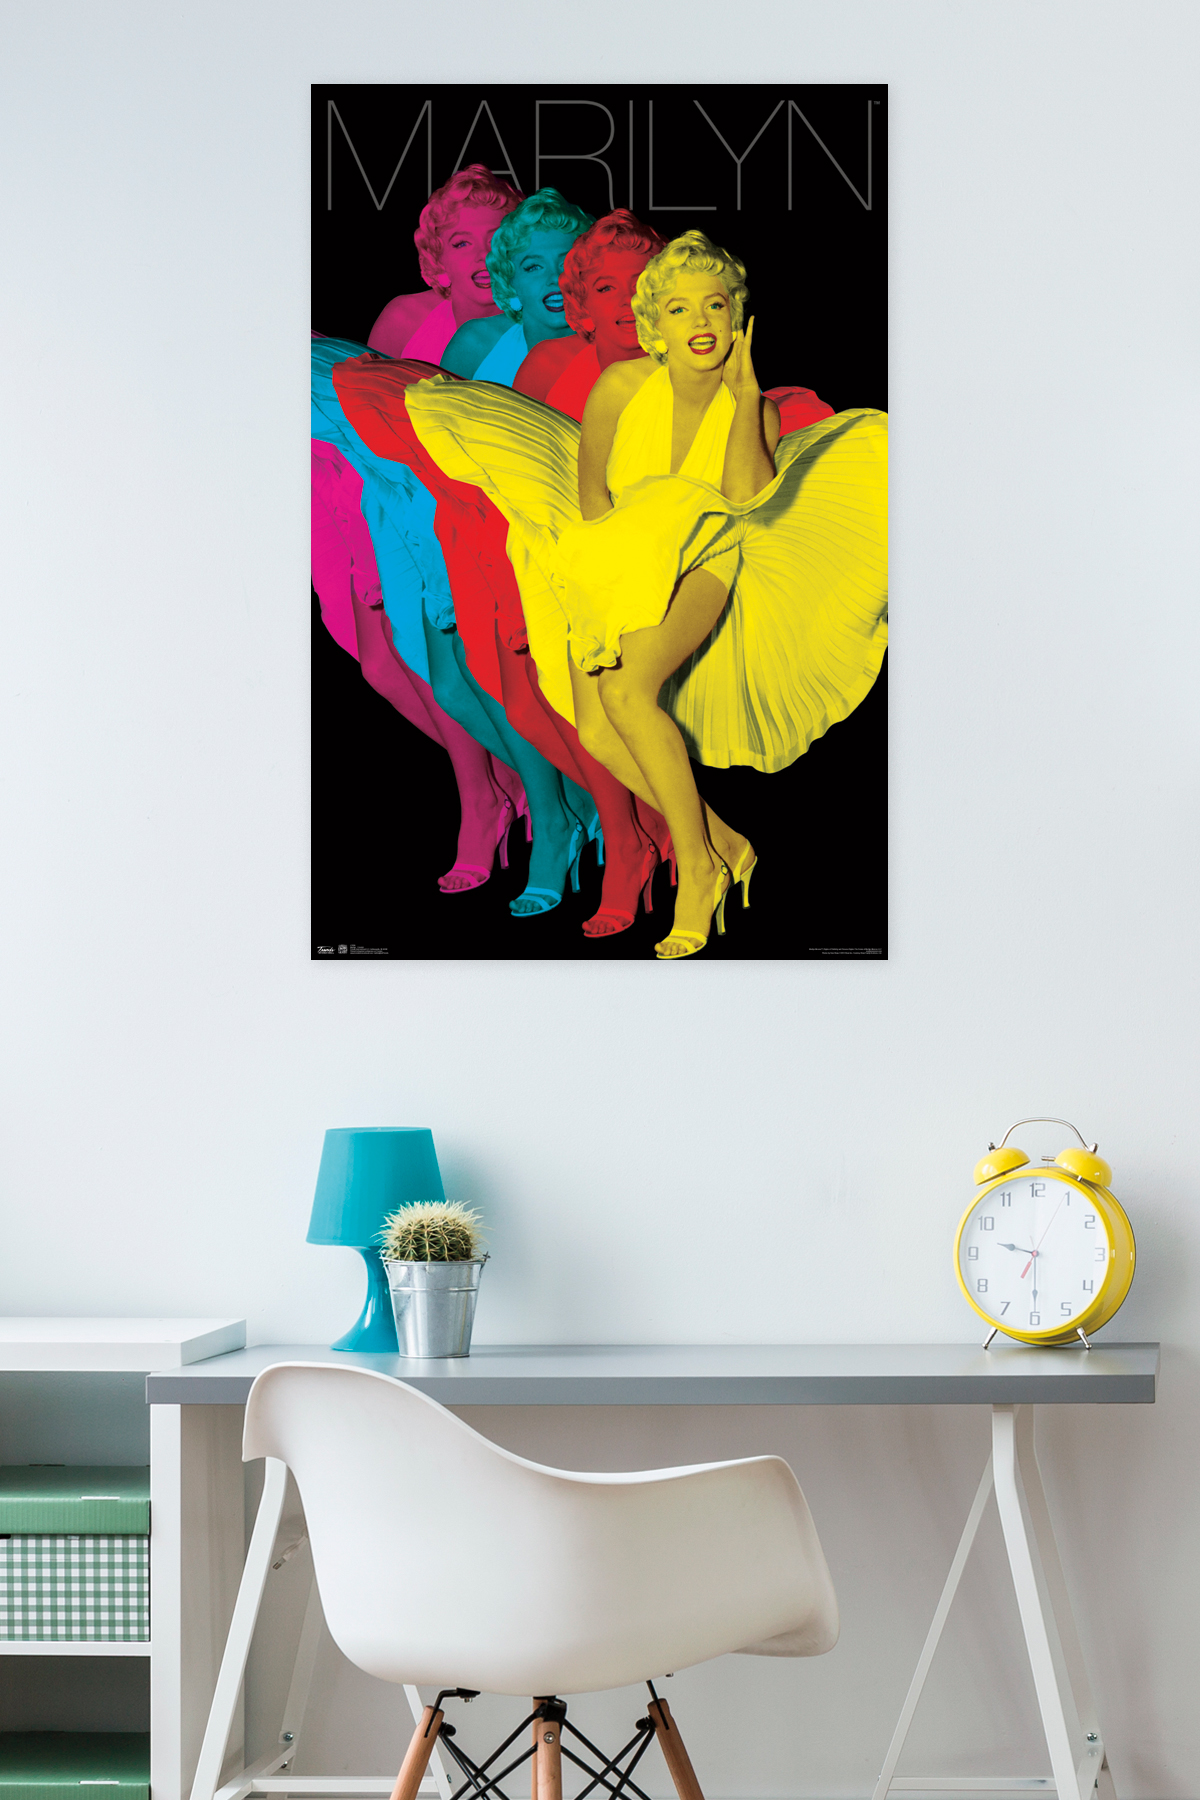 Trends International Marilyn Monroe Colorful Wall Poster 22.375" x 34" - image 2 of 2